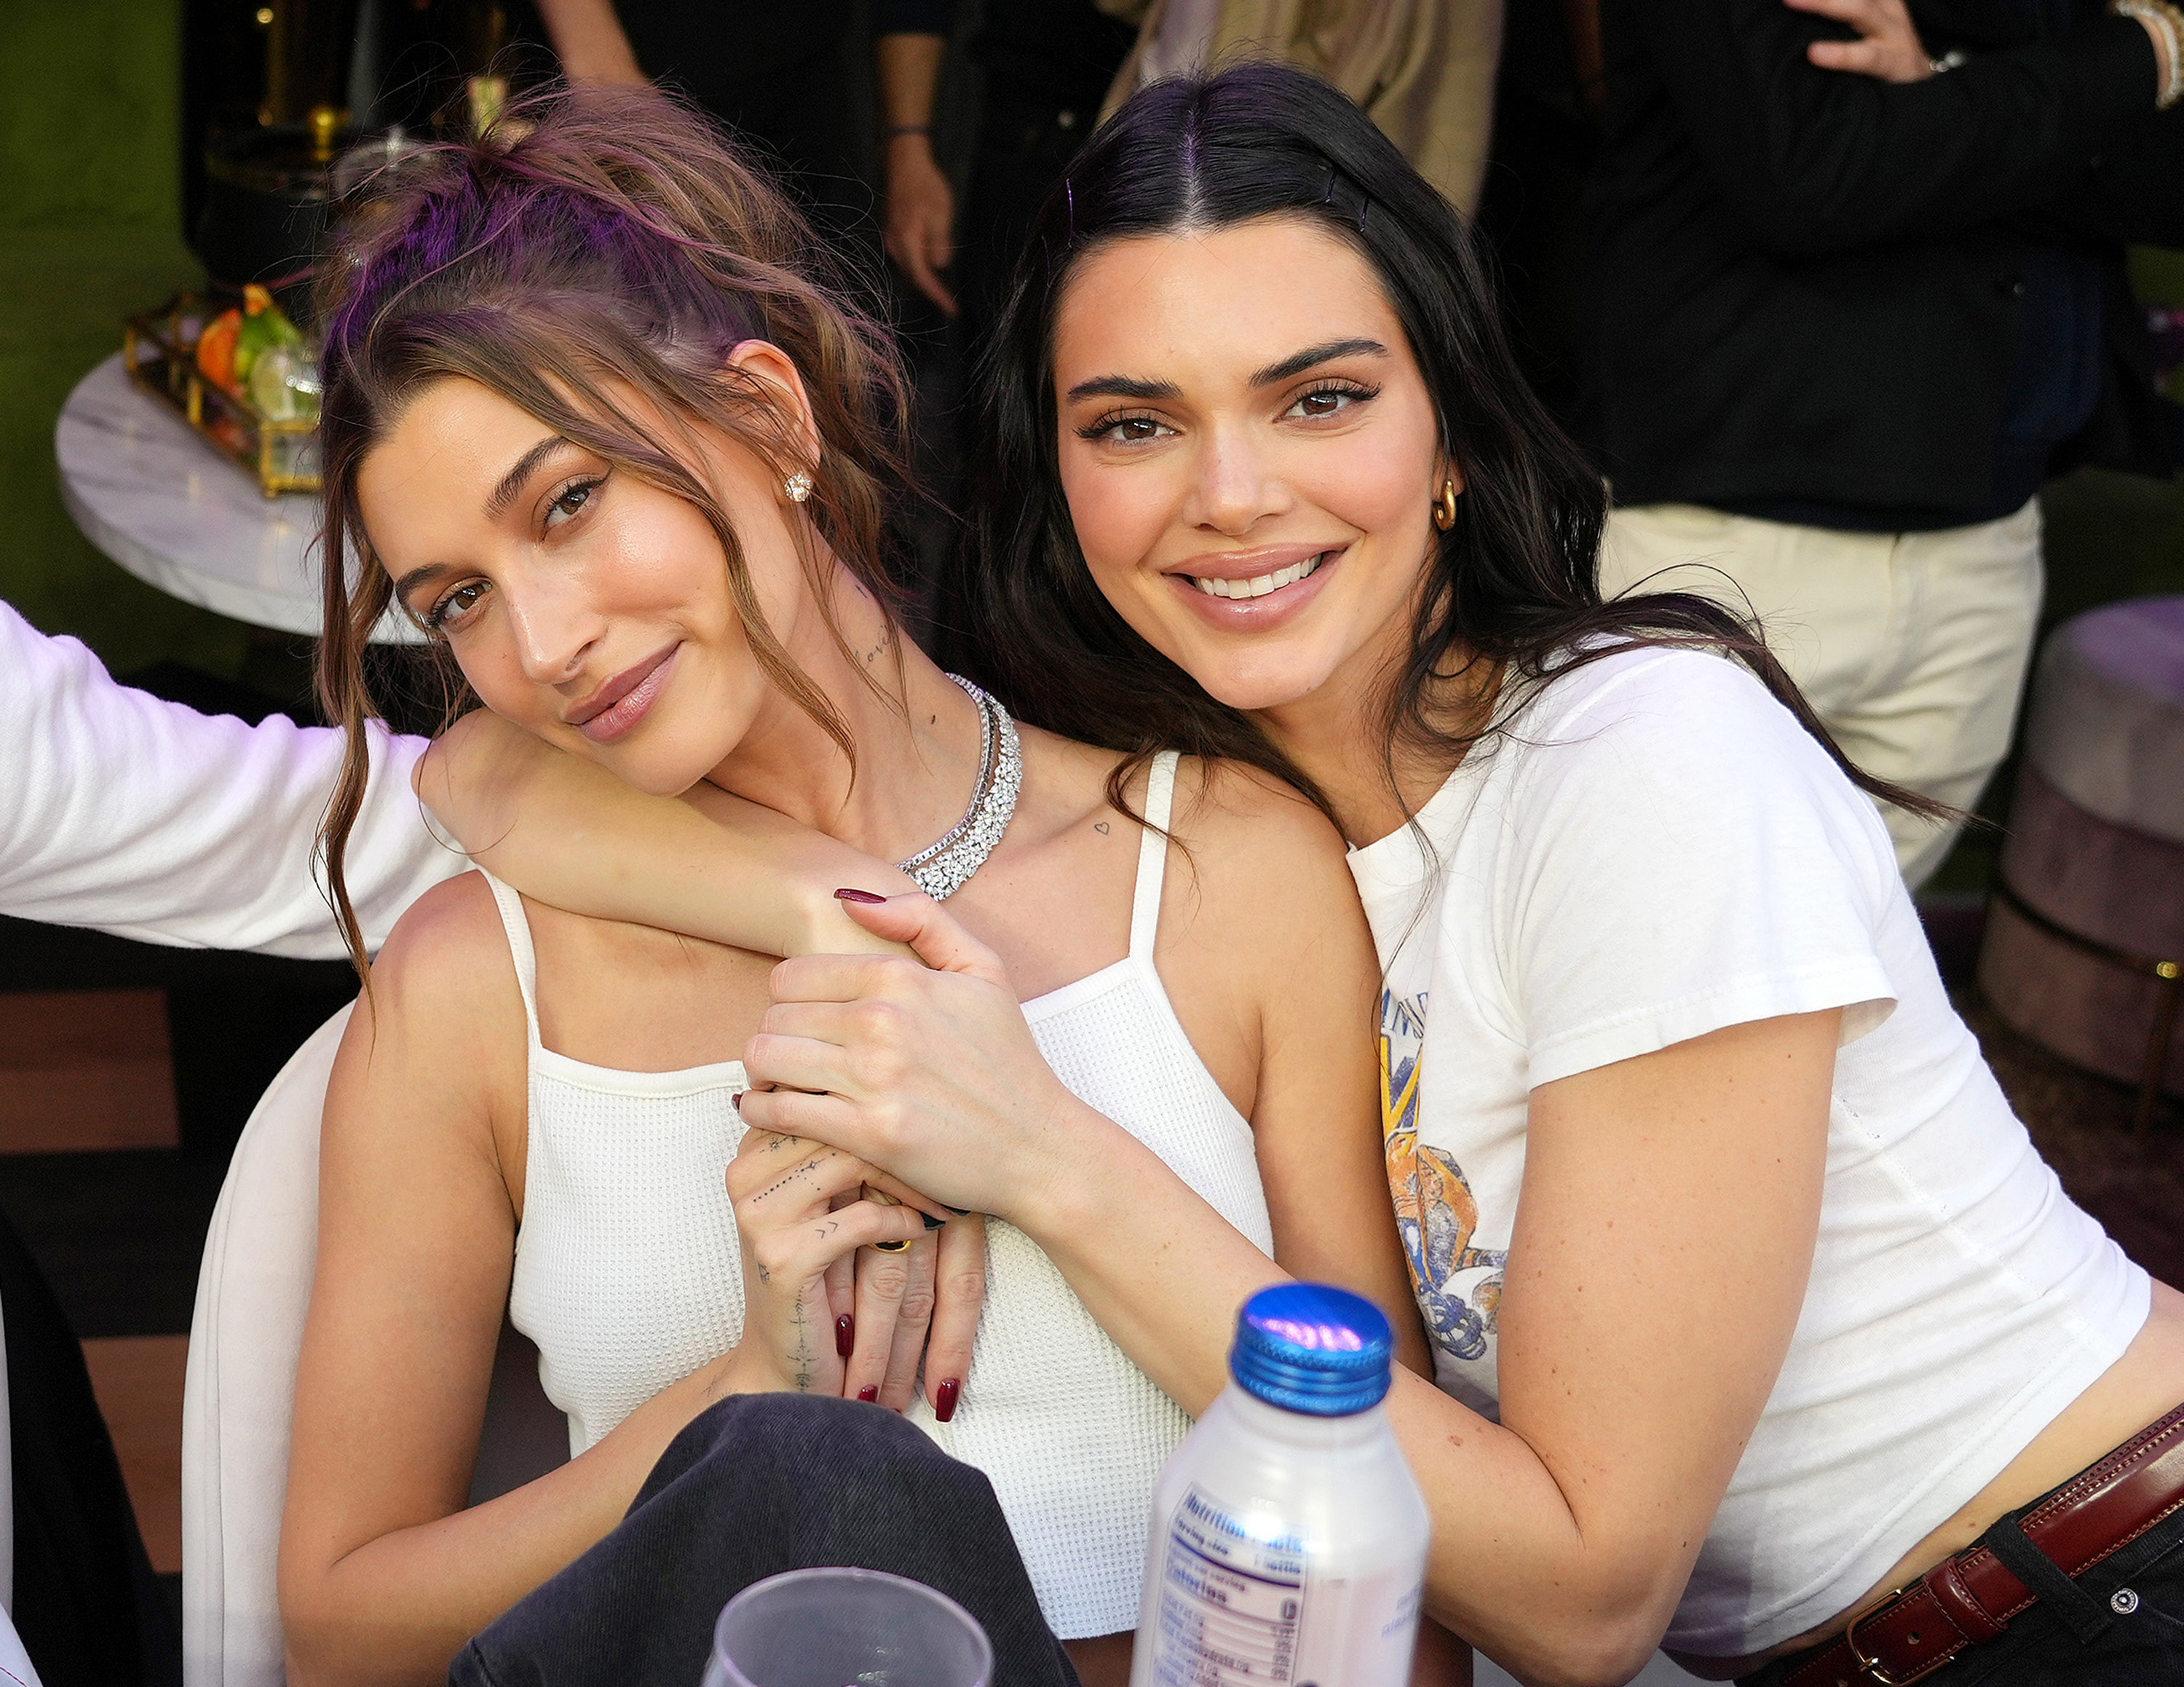 Kendall hugging friend and fellow model Hailey Beiber